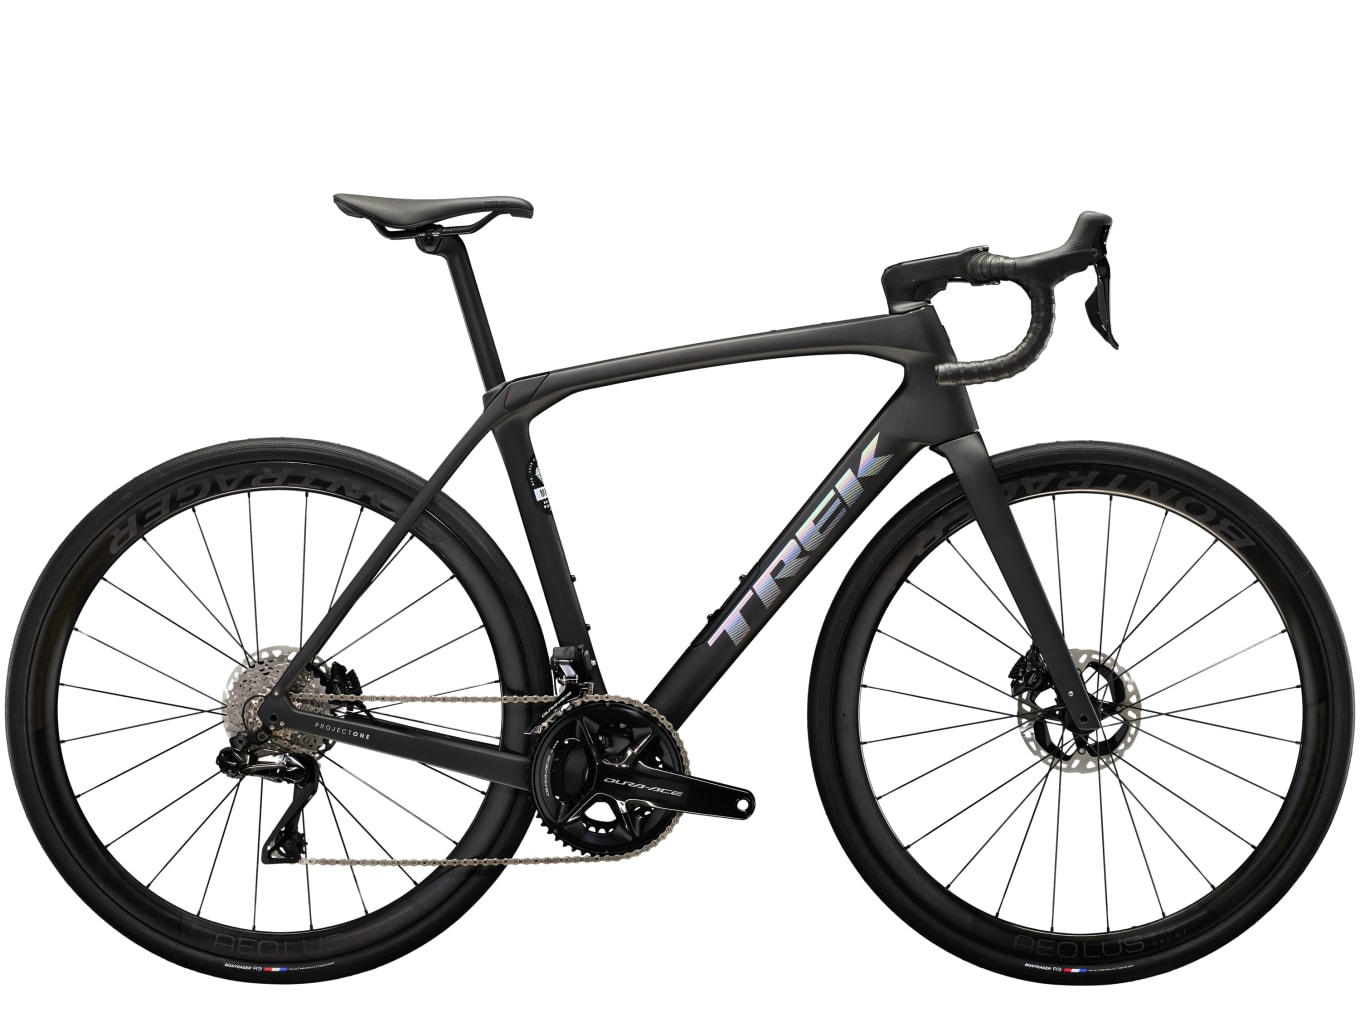 Trek road bikes for efficiency and speed wherever you ride (JP)